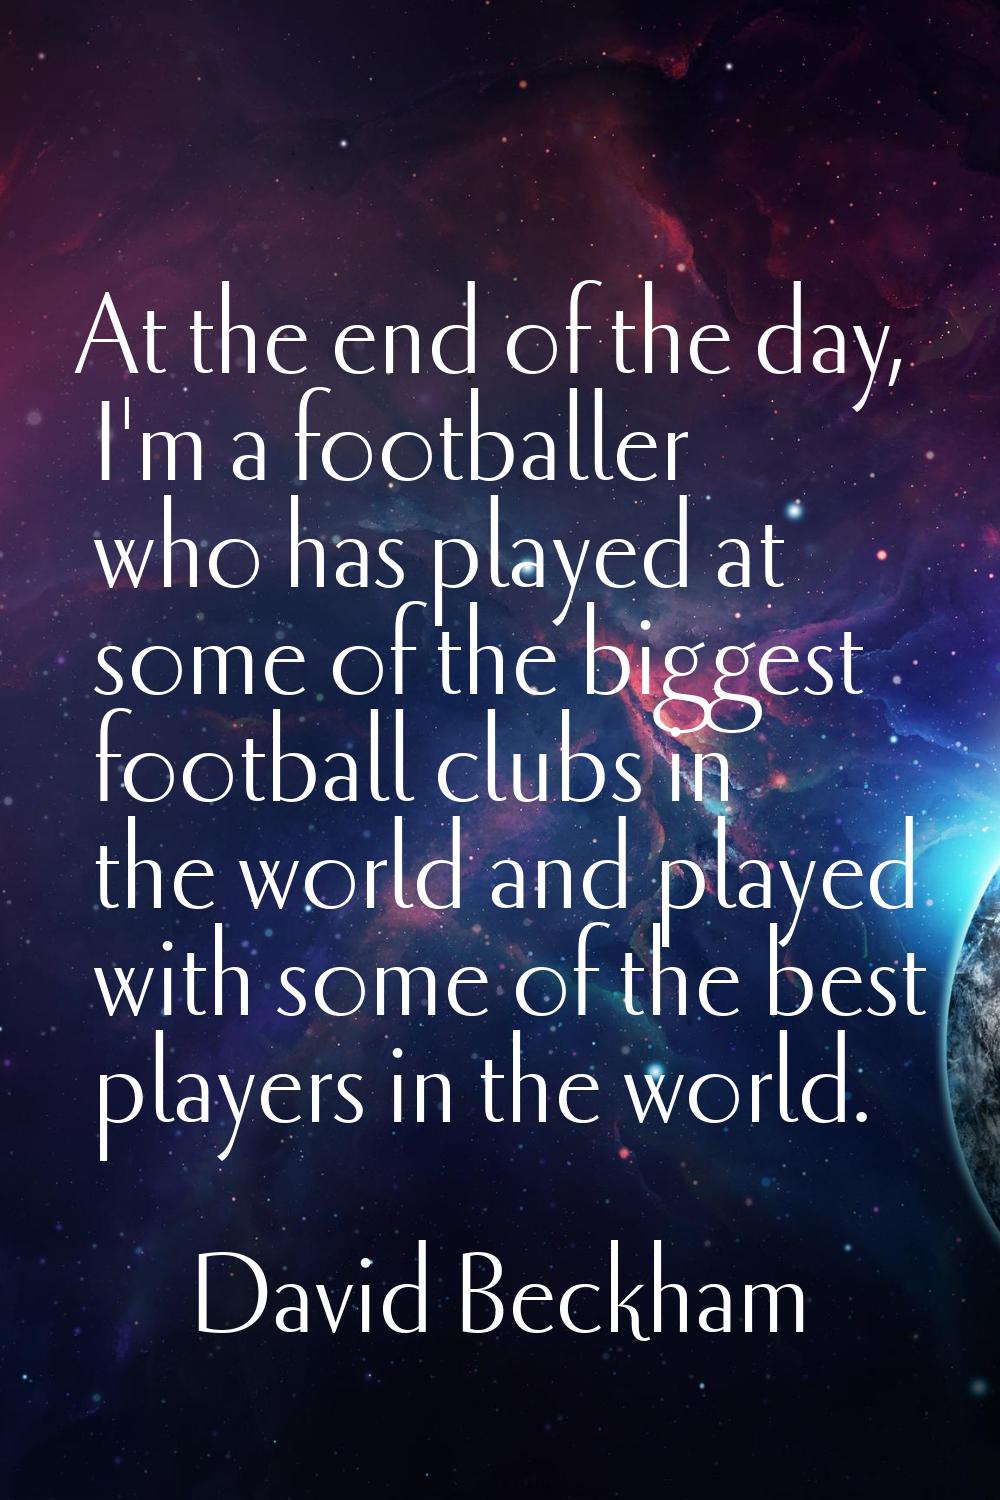 At the end of the day, I'm a footballer who has played at some of the biggest football clubs in the